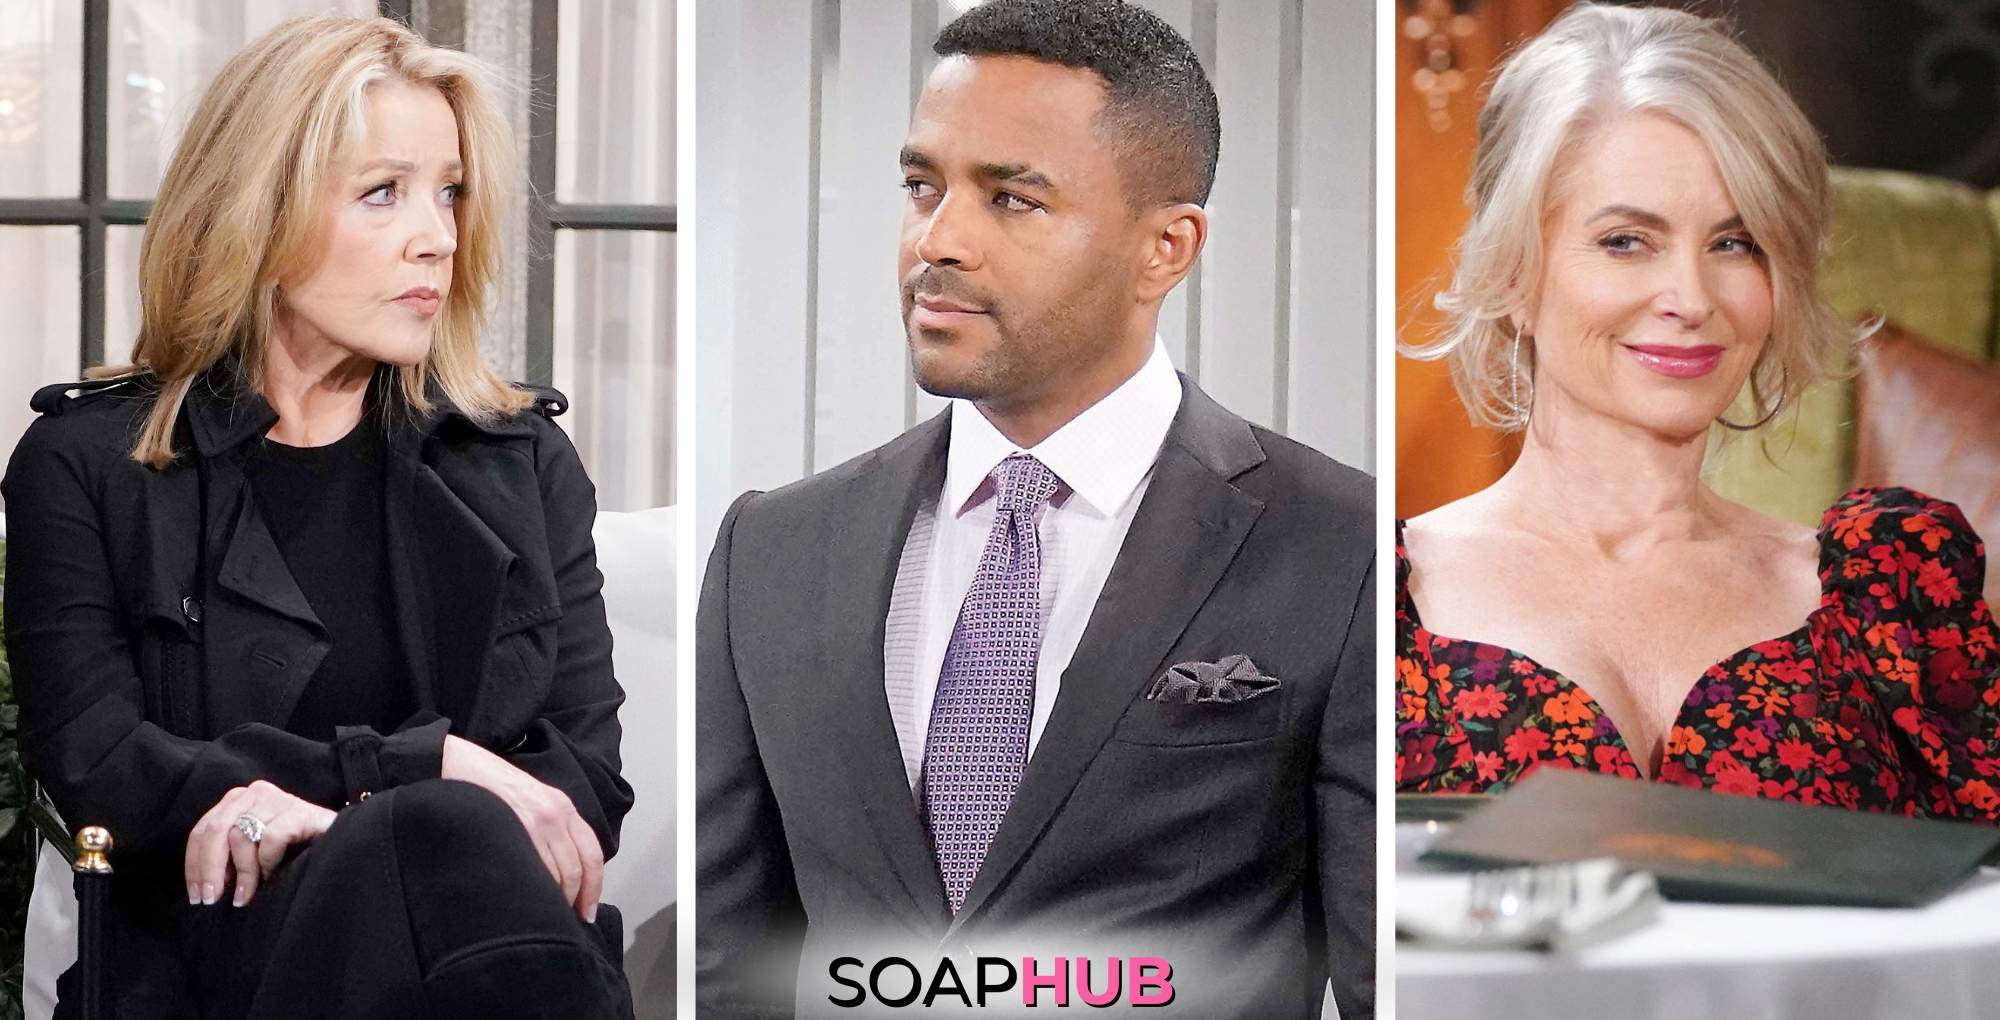 Nikki, Nate, and Ashley are featured in The Young and the Restless Spoilers for the week of April 29 - May 3, 2024. With soap hub log on bottom of image